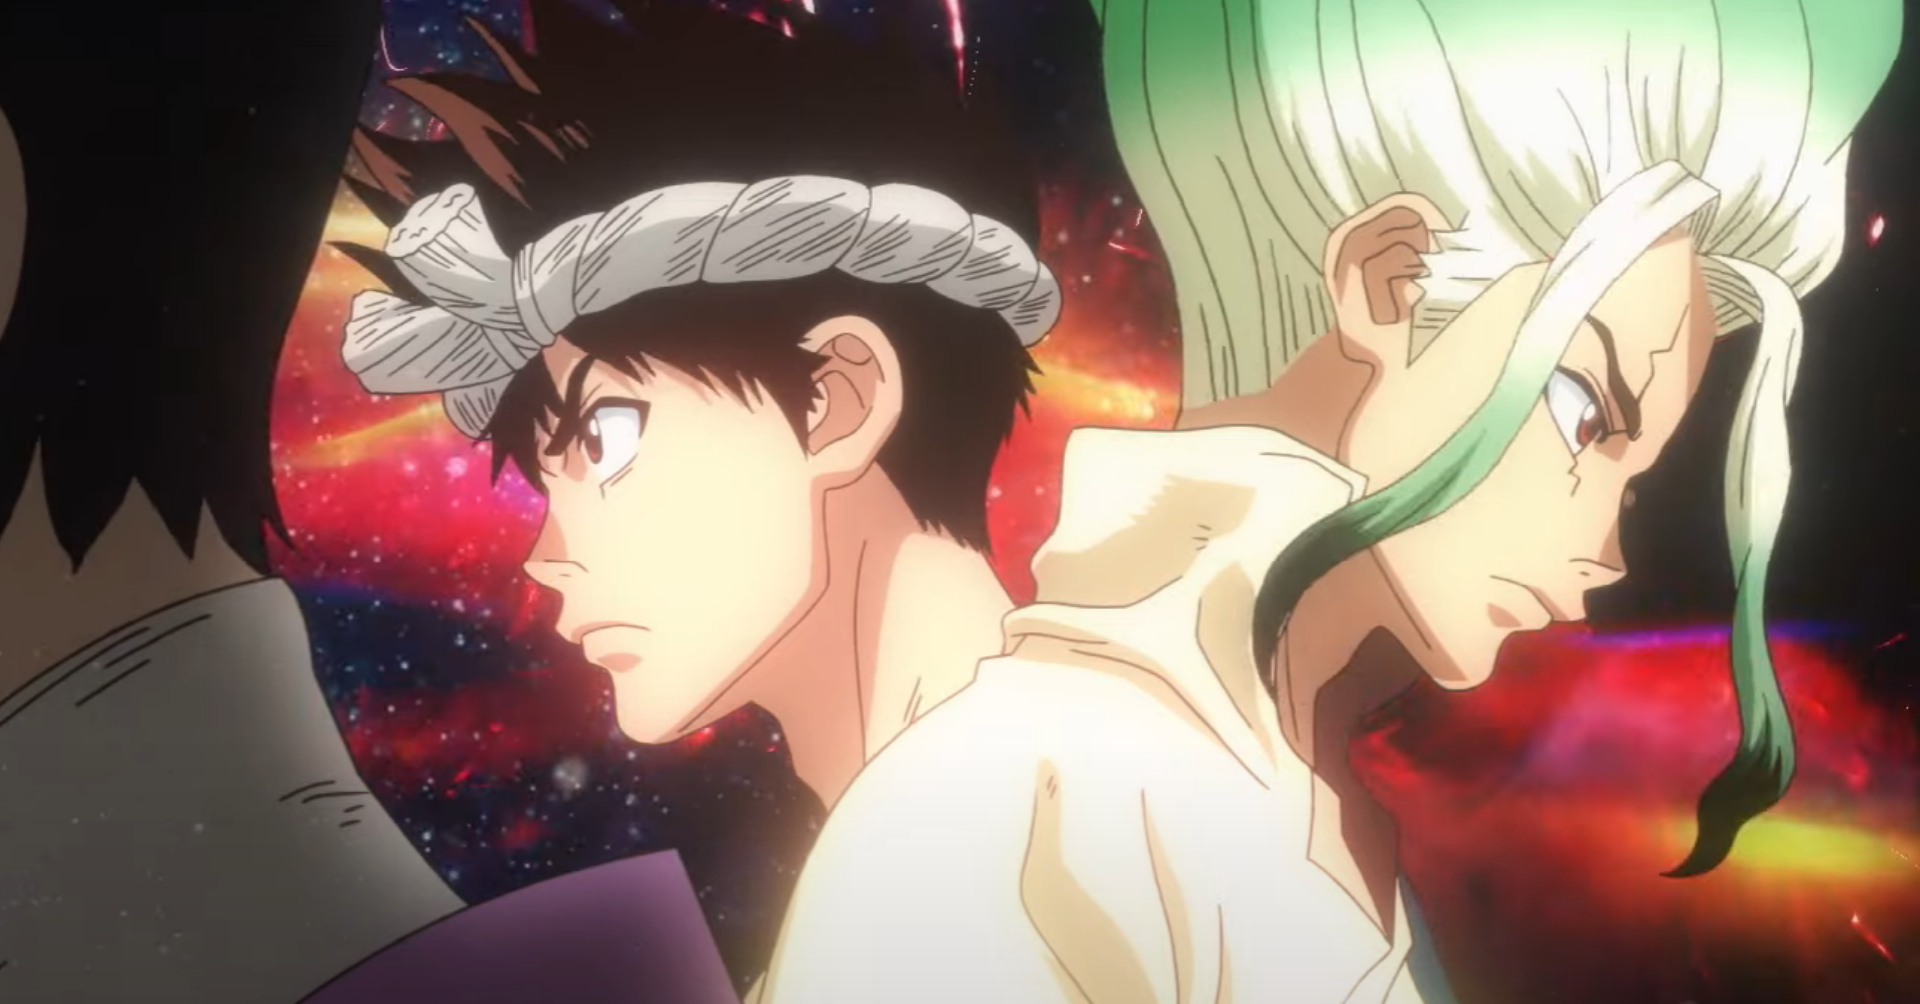 Dr Stone season 3 episode 2 release time, date and preview caption